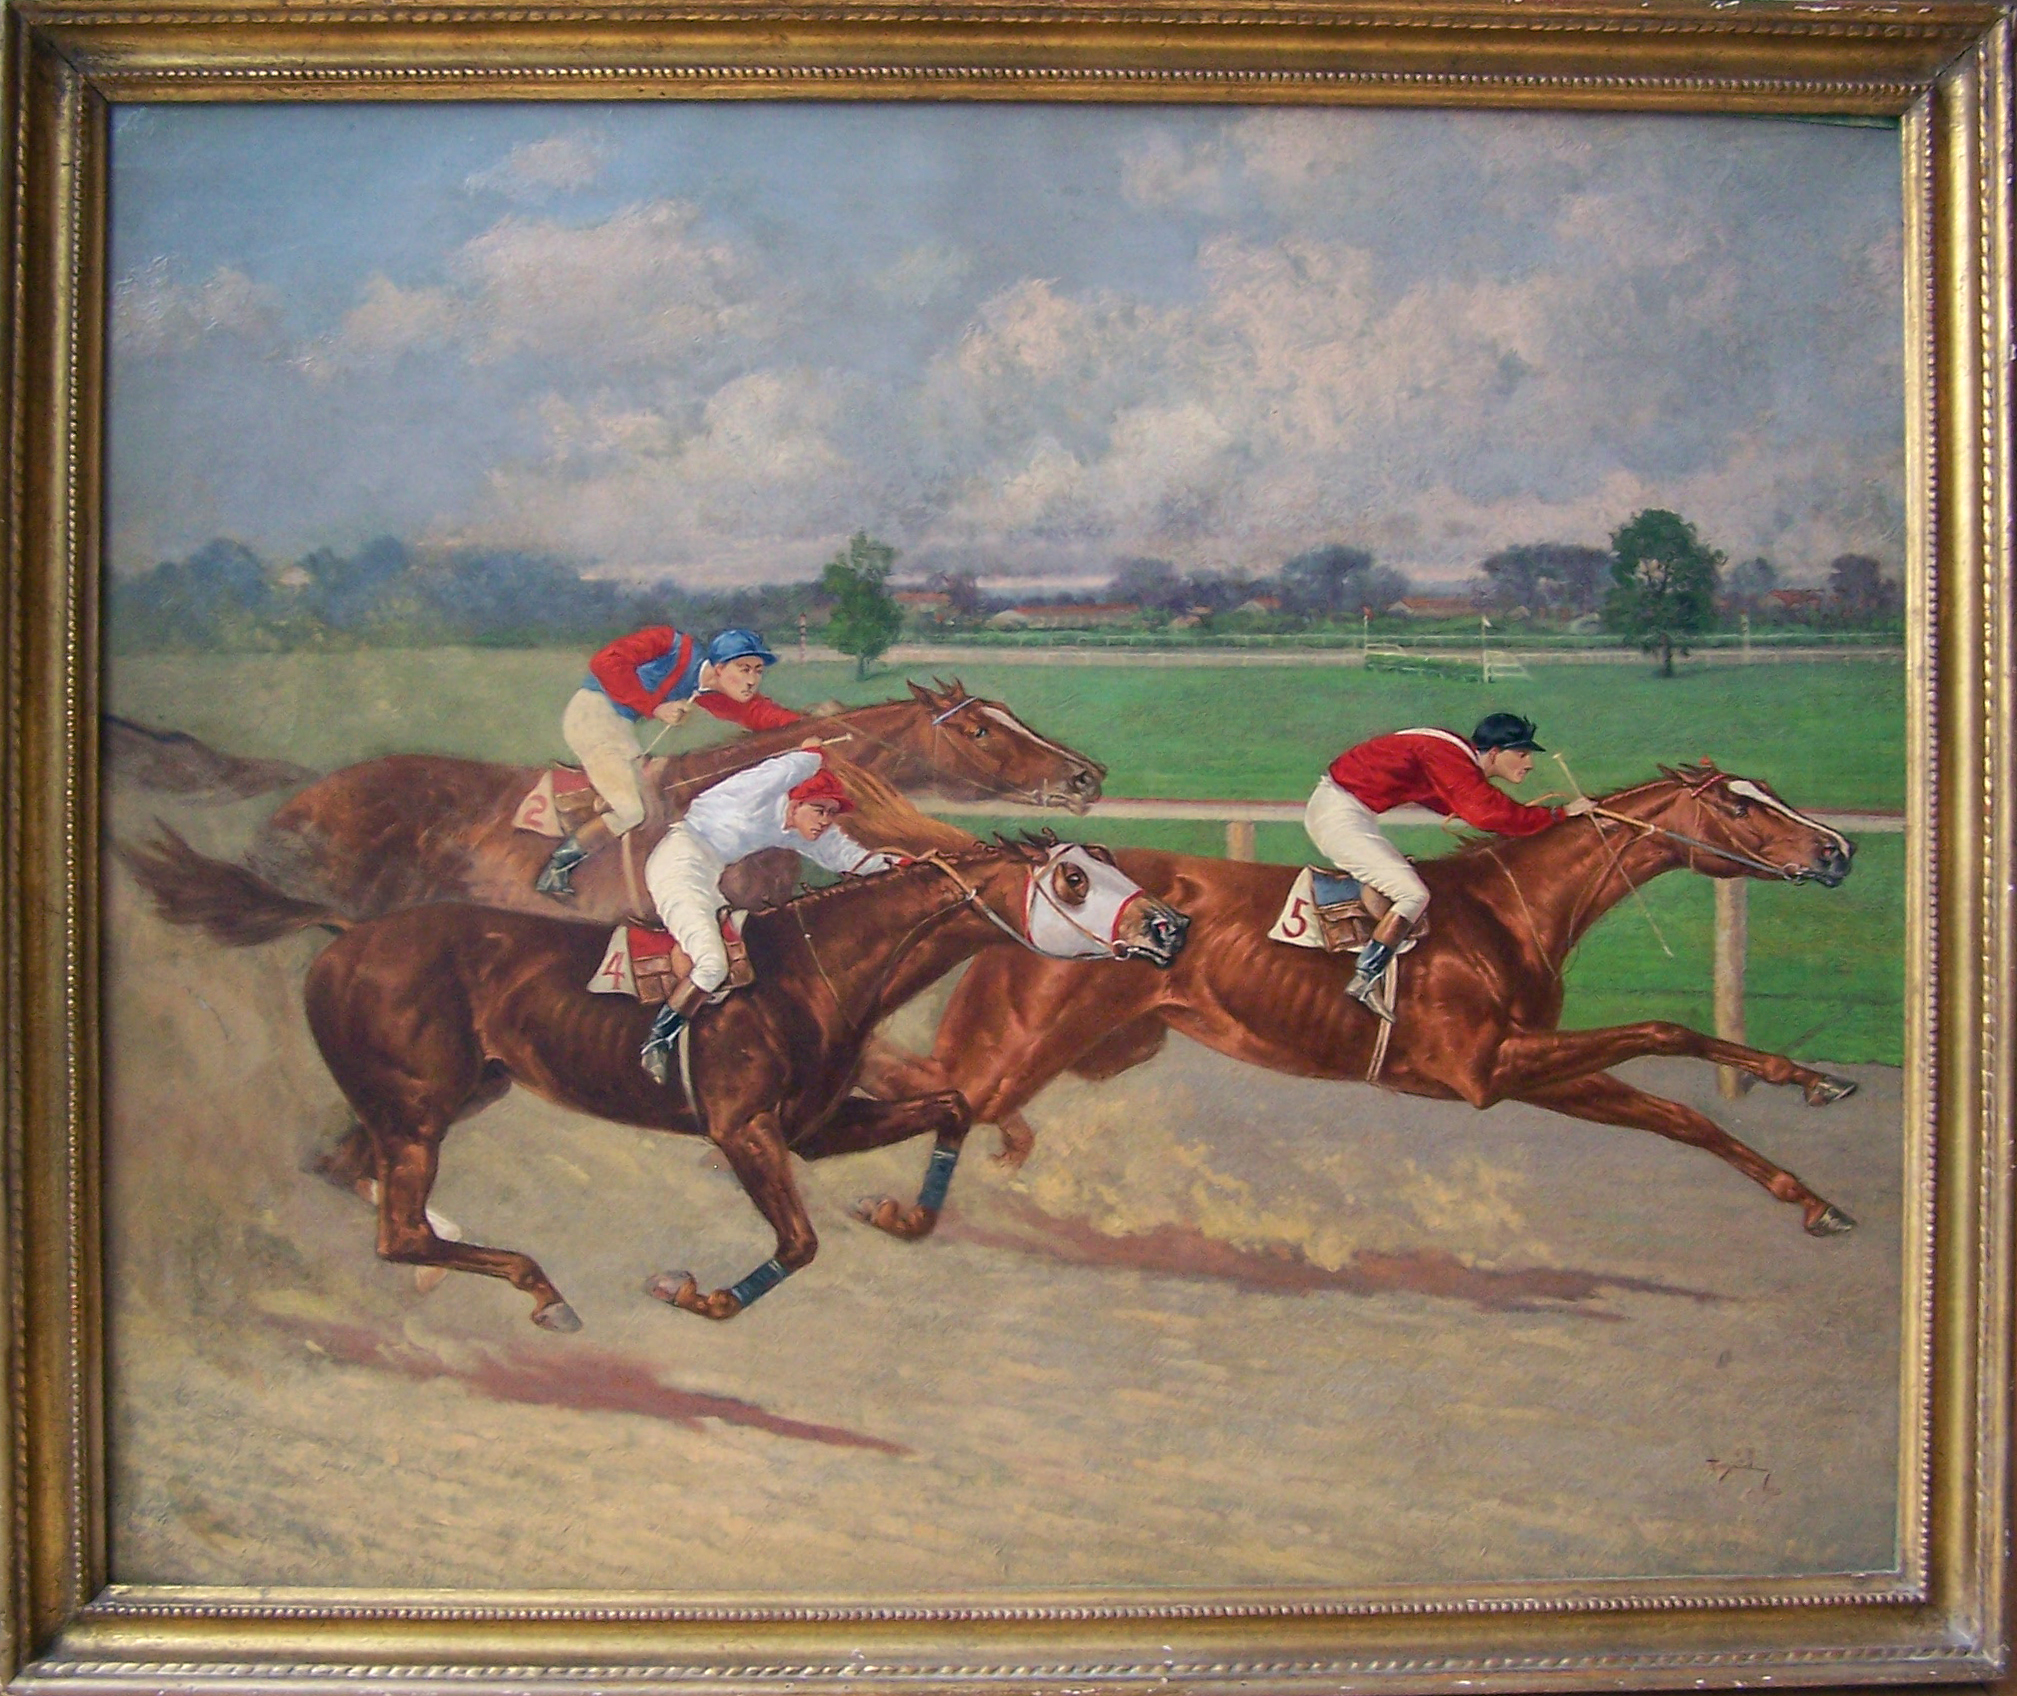 1996.2.1: Finish of the White Plains Handicap, Henry Stull (1851-1913), Oil on canvas, 1903, Museum Purchase 